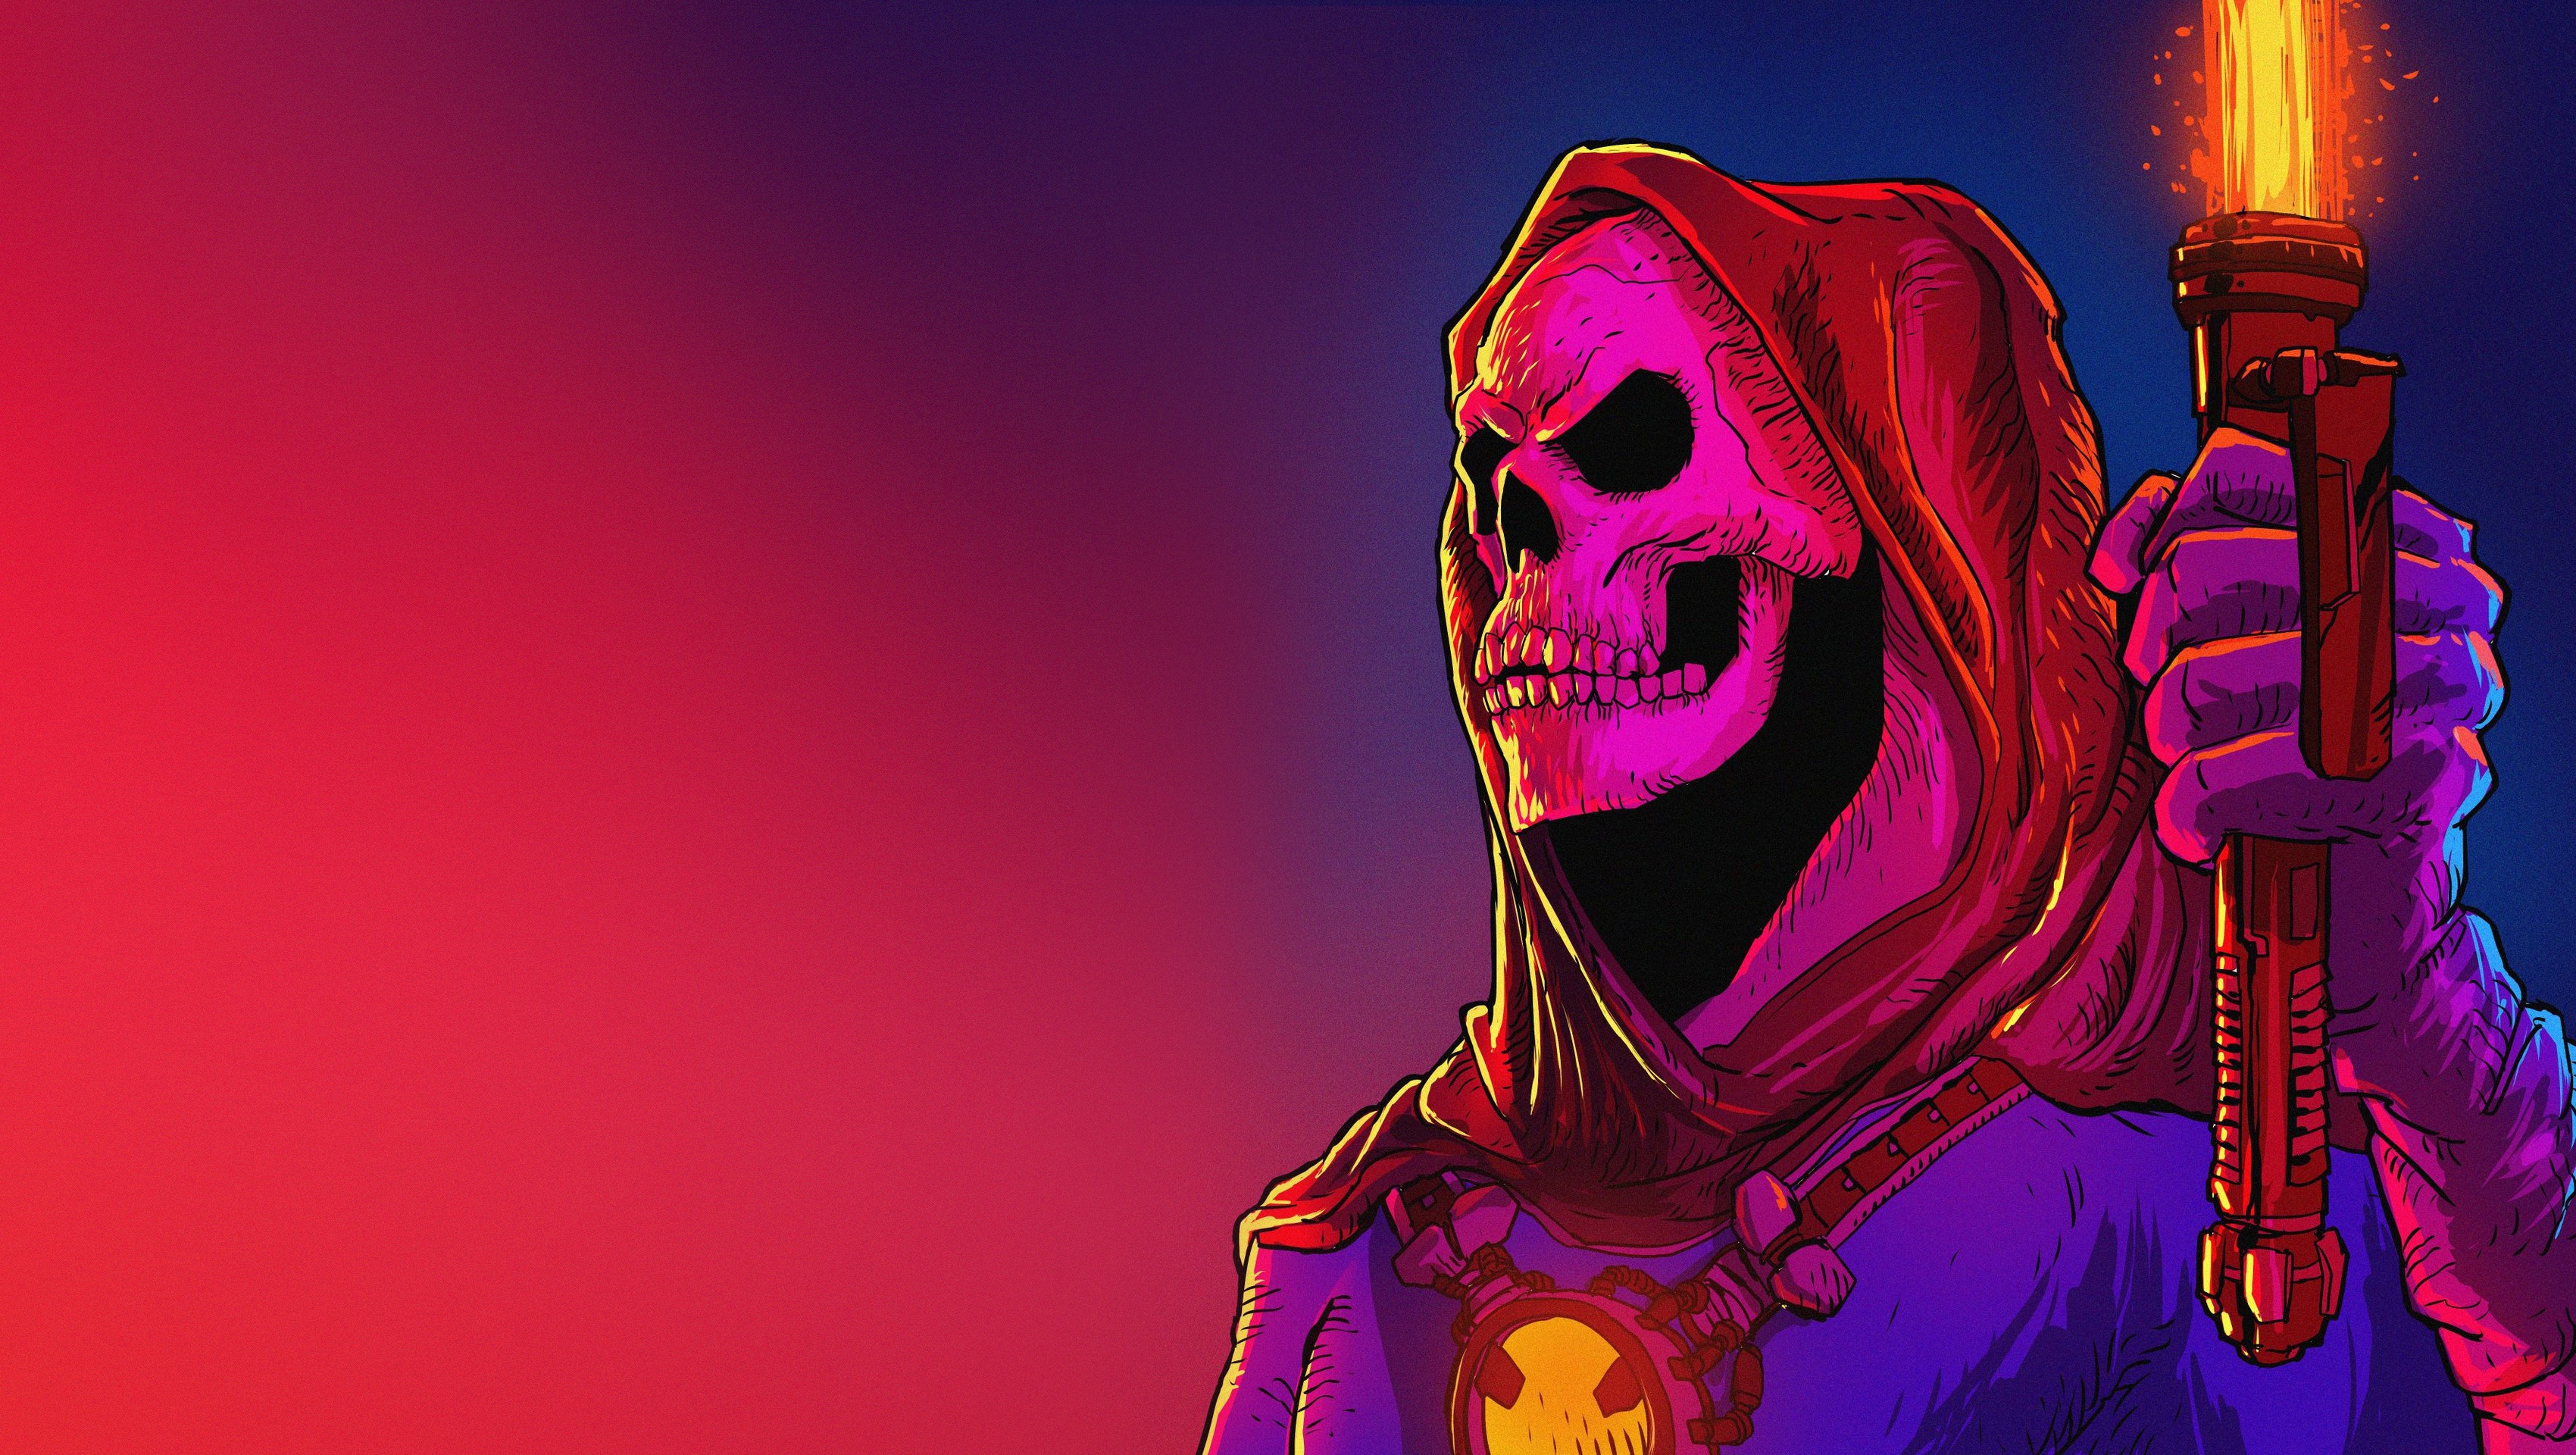 Colorful Skeletor Artwork Masters Of The Universe He Man And The Masters Of The Universe 3400x1920